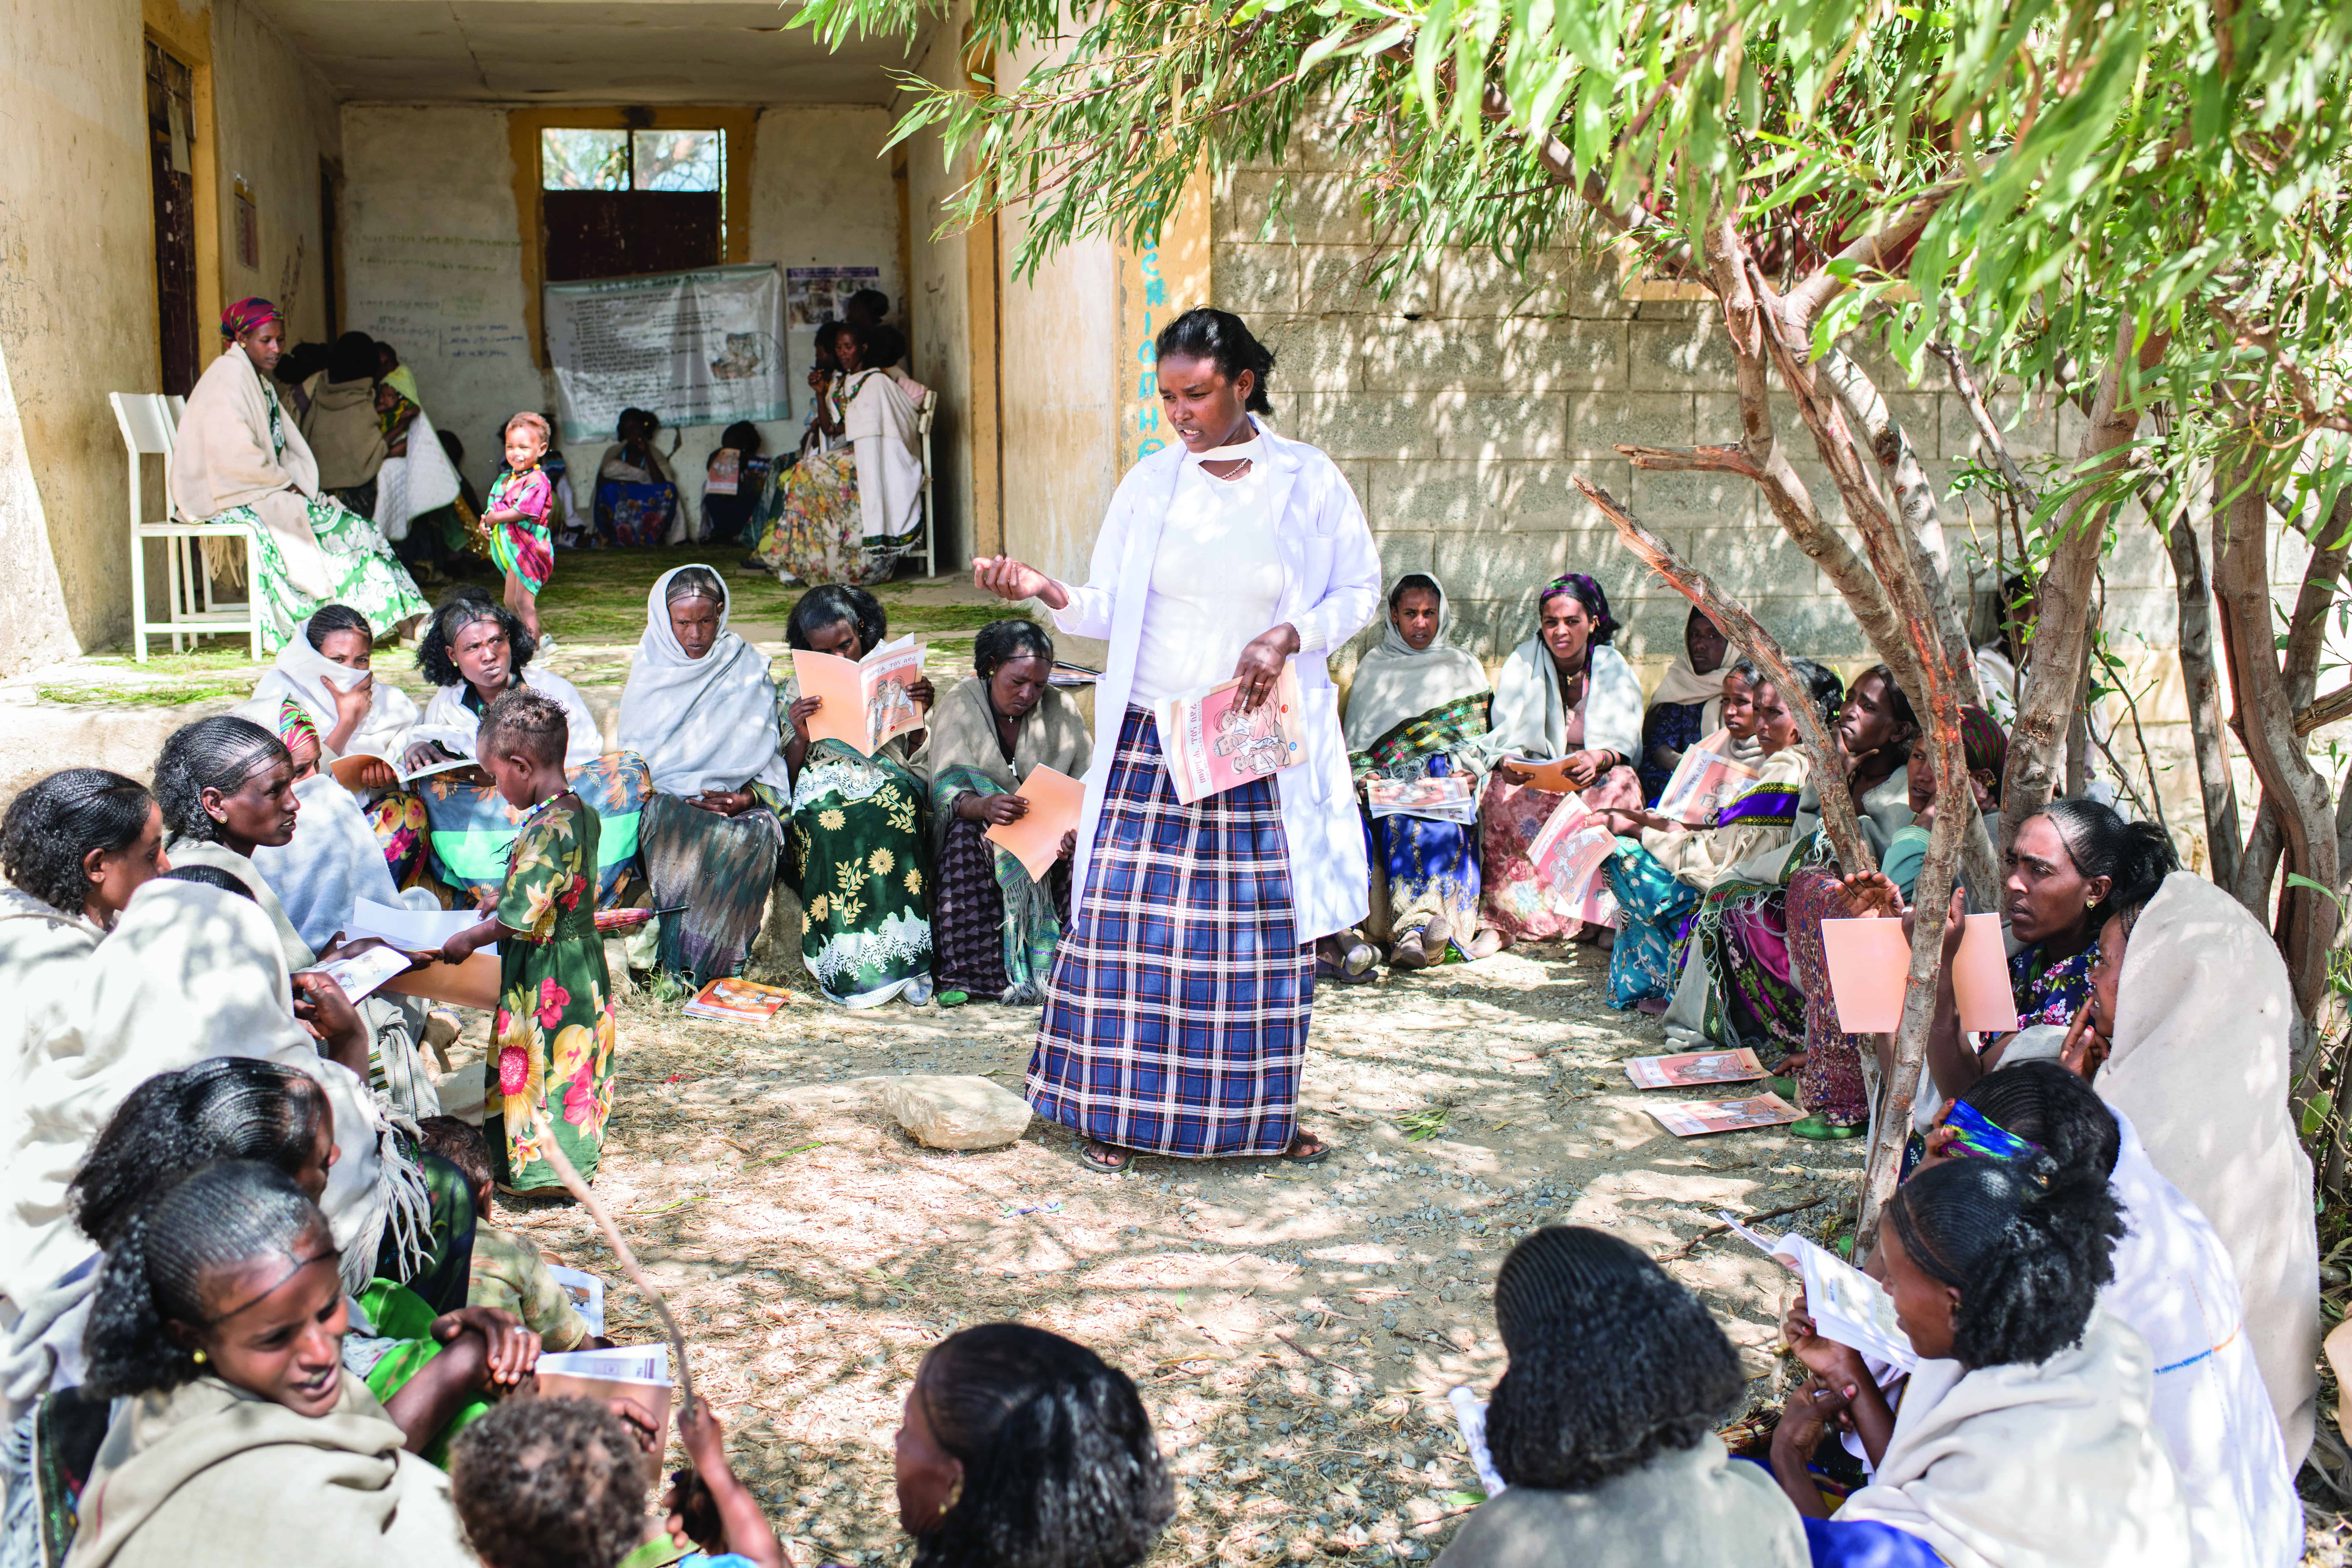 Family Planning and Contraception Research in Ethiopia featured in Reproductive Health Journal Supplement